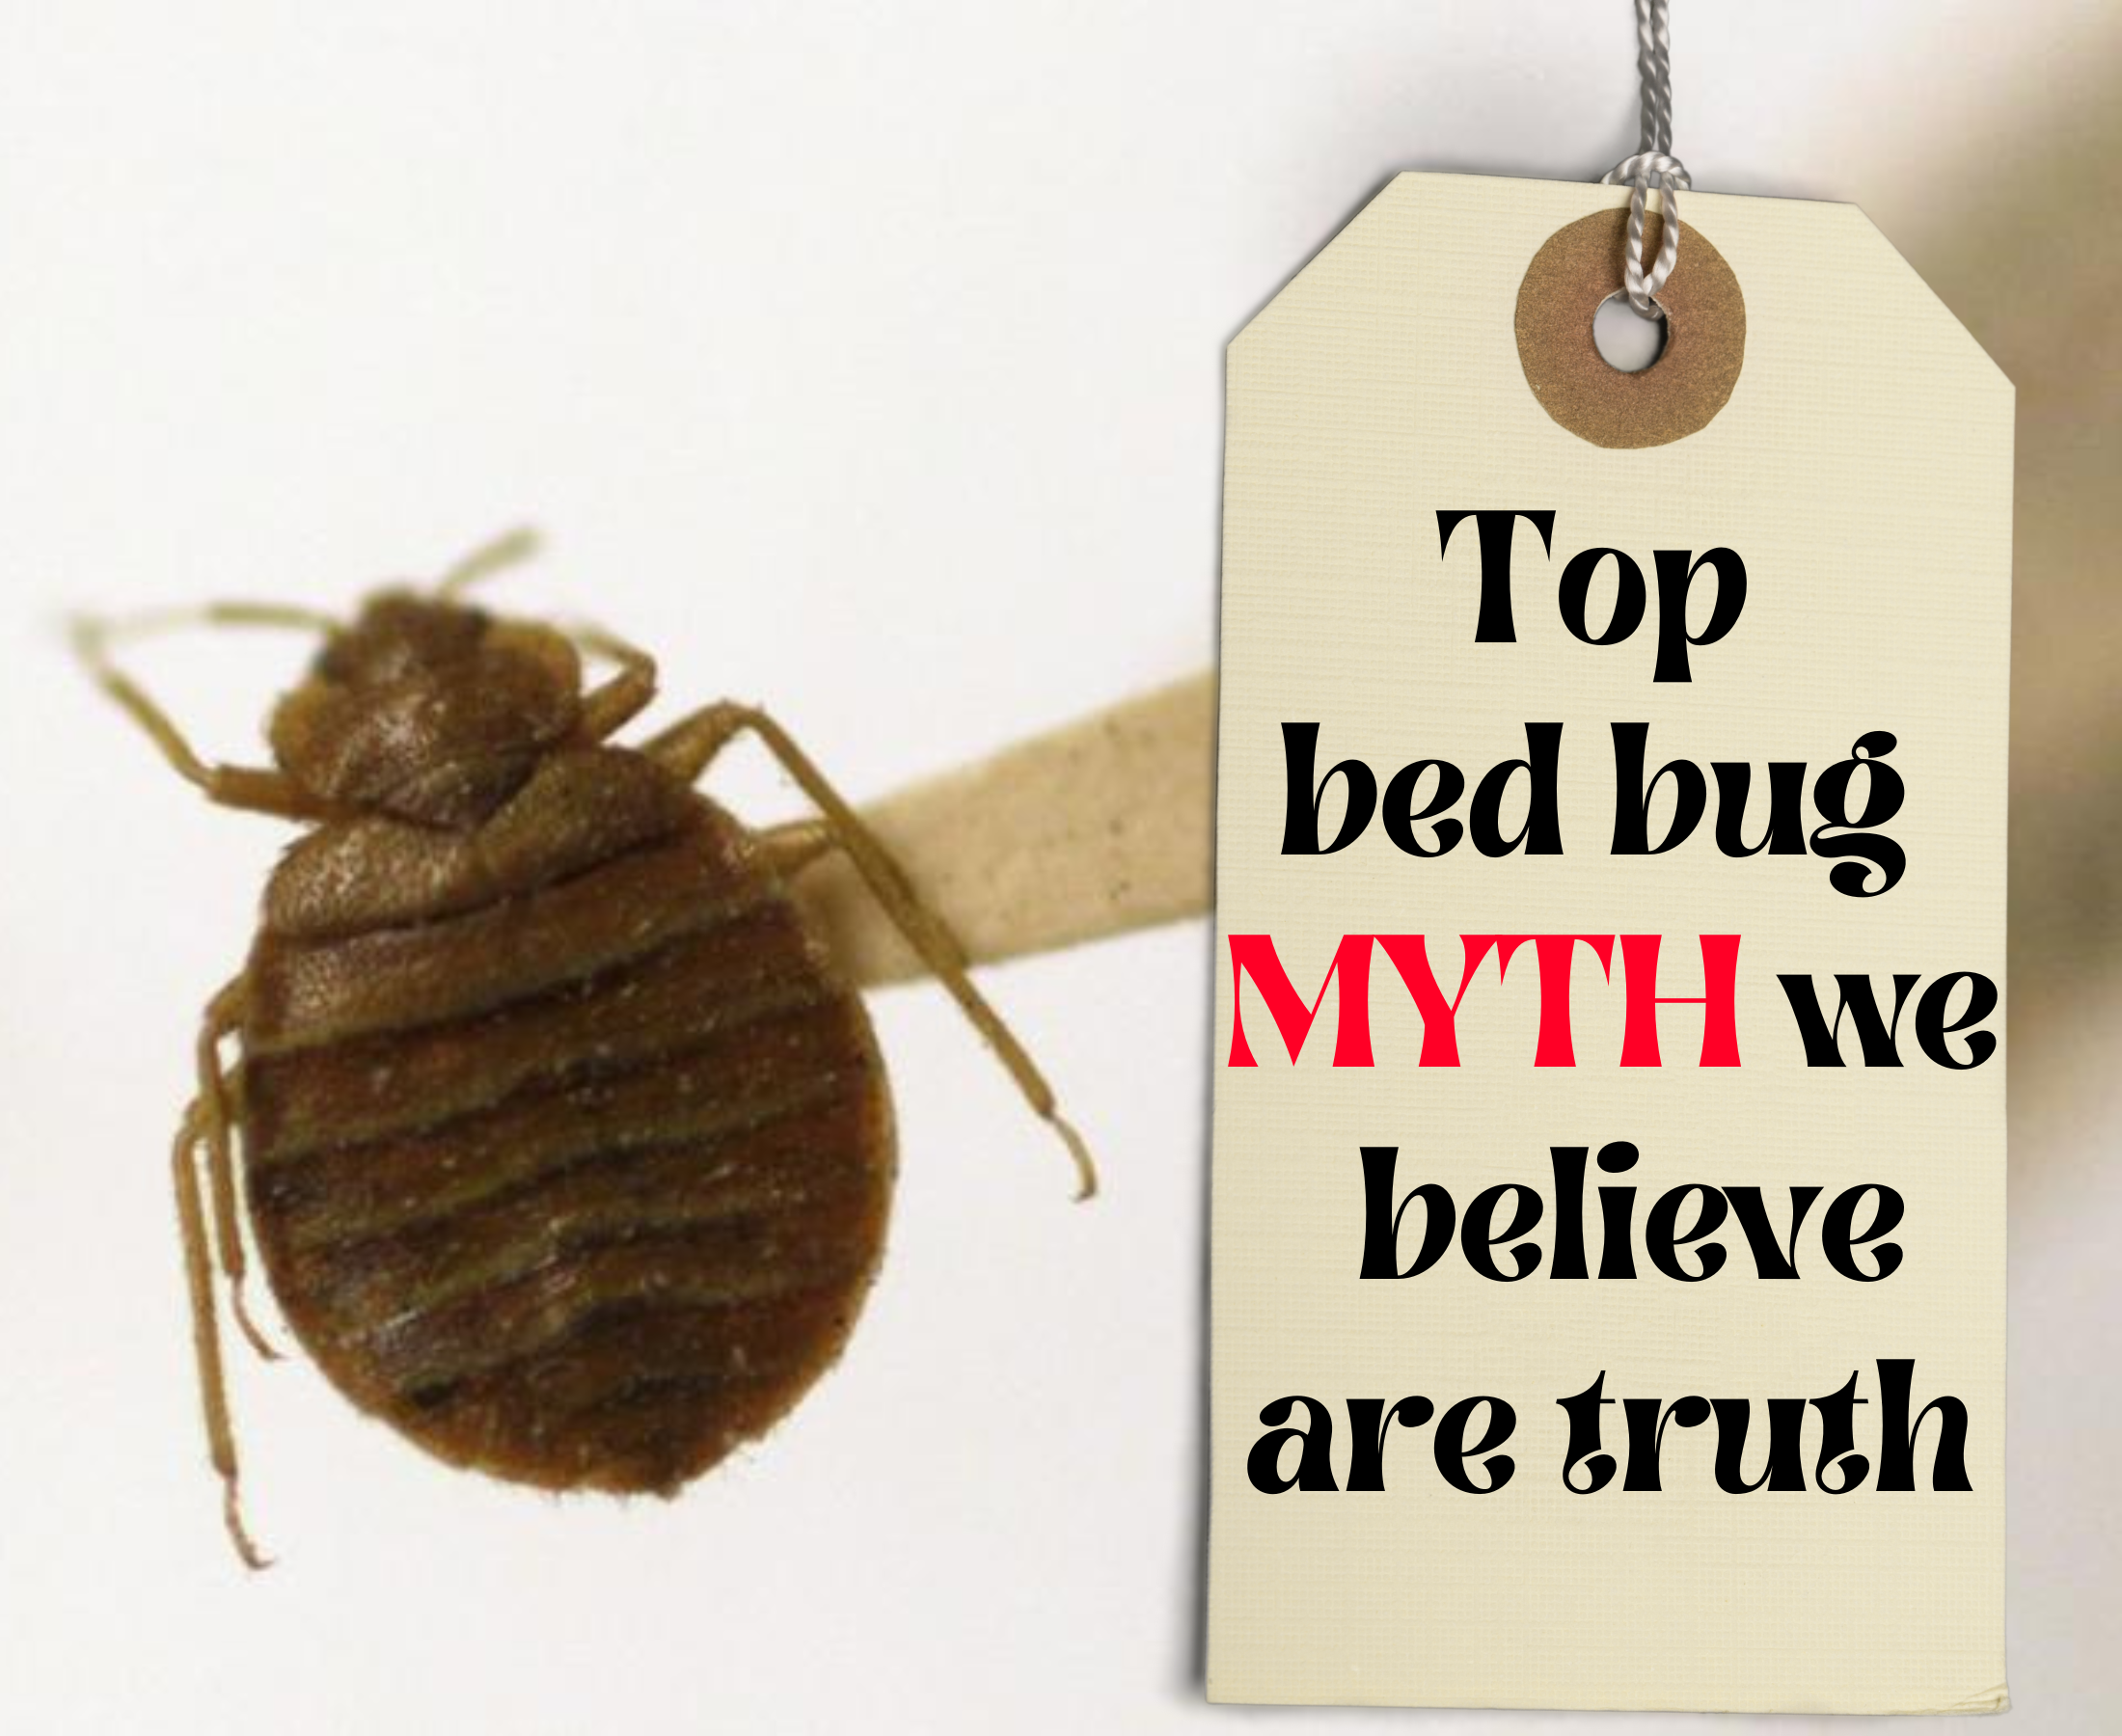 Does a dirty house invite a bed bug? Bed bug myths